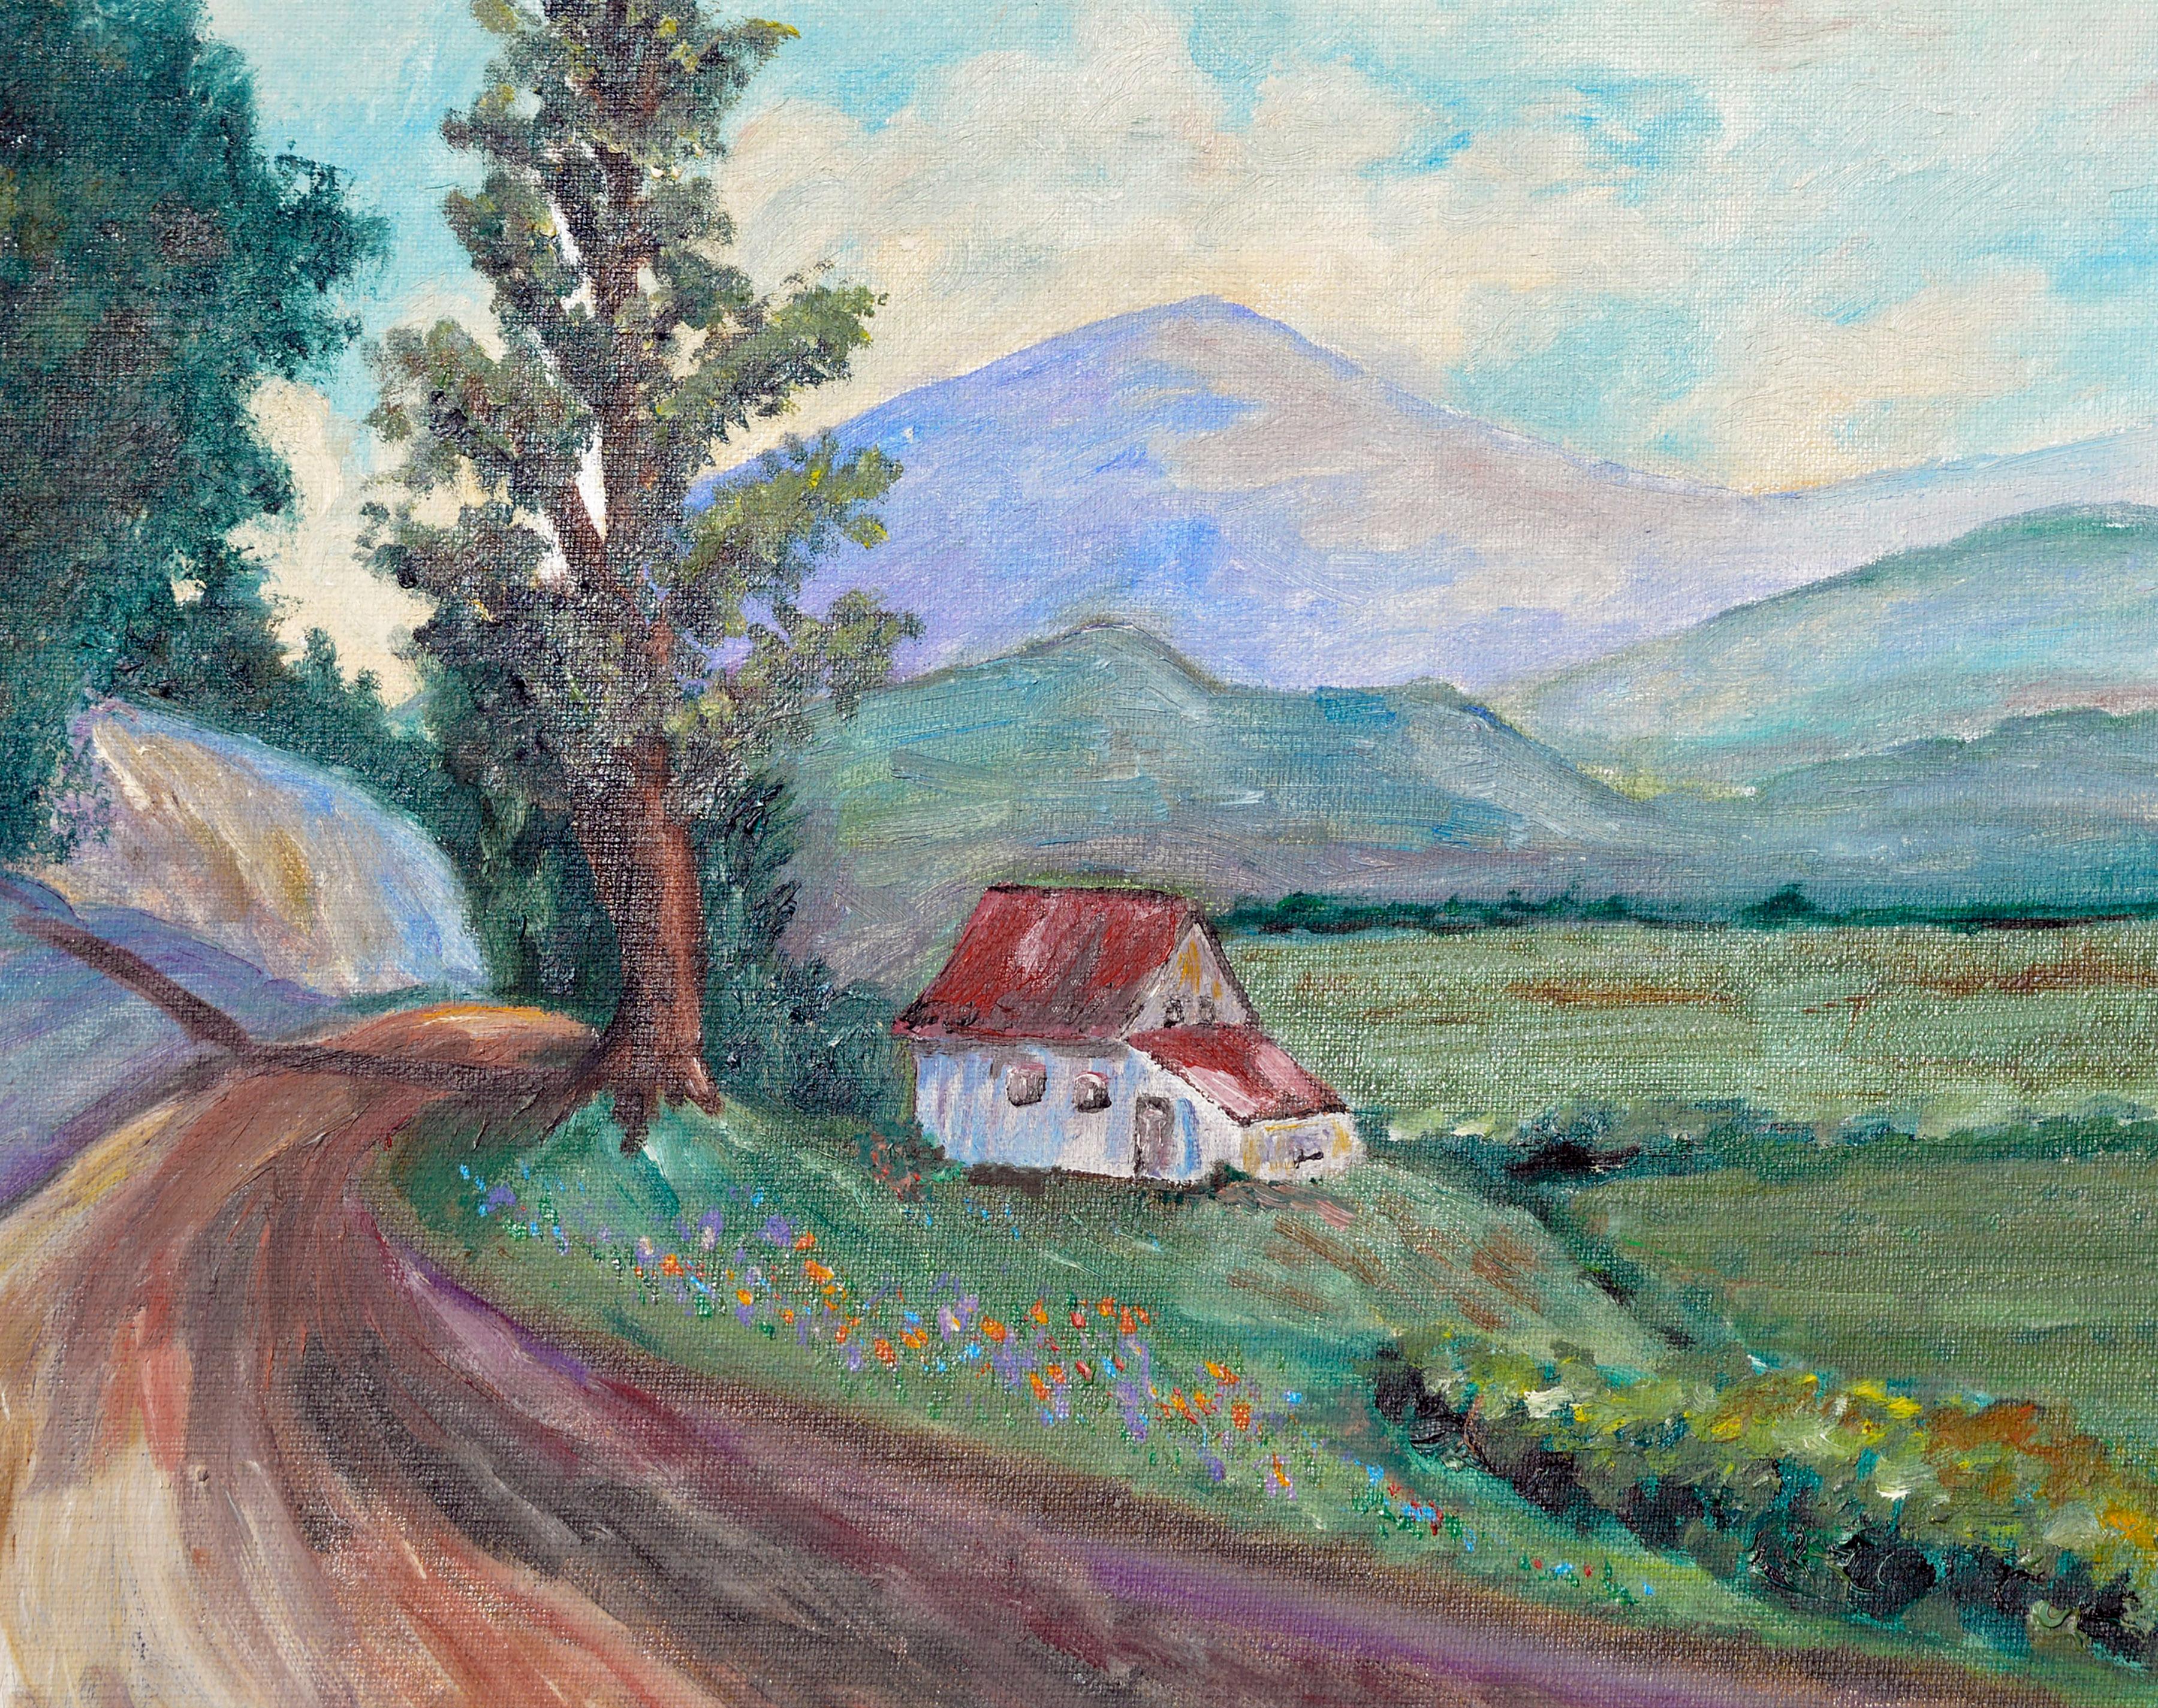 Country Home in Spring, Mid Century Pastoral Landscape with Wildflowers - Painting by Unknown